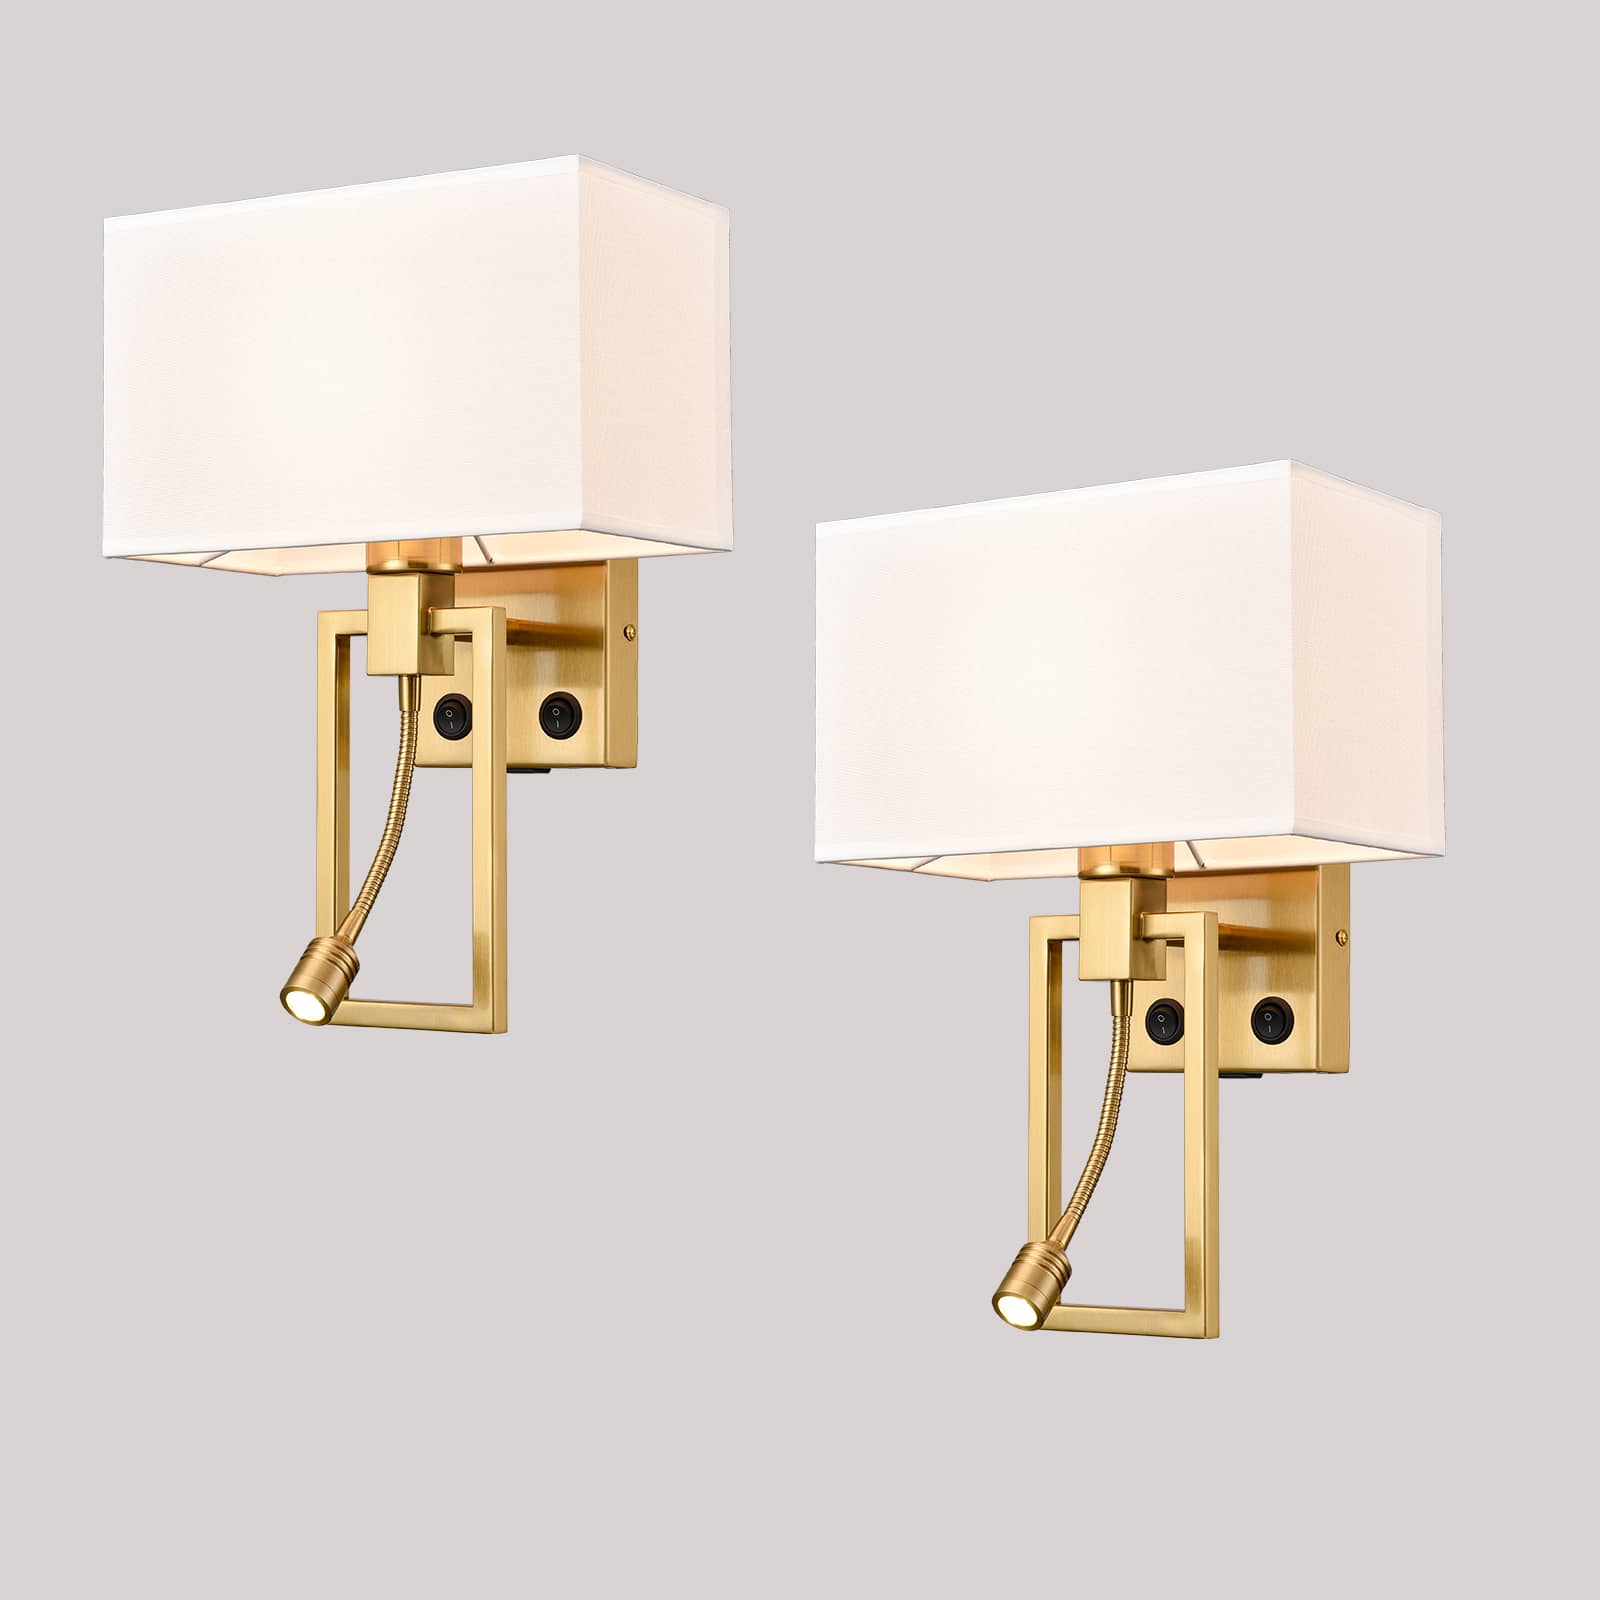 Pair of Modern Brushed Copper Hotel Style Adjustable LED Reading Lamp Wall Light Fittings with White Shades & USB Charging Ports 